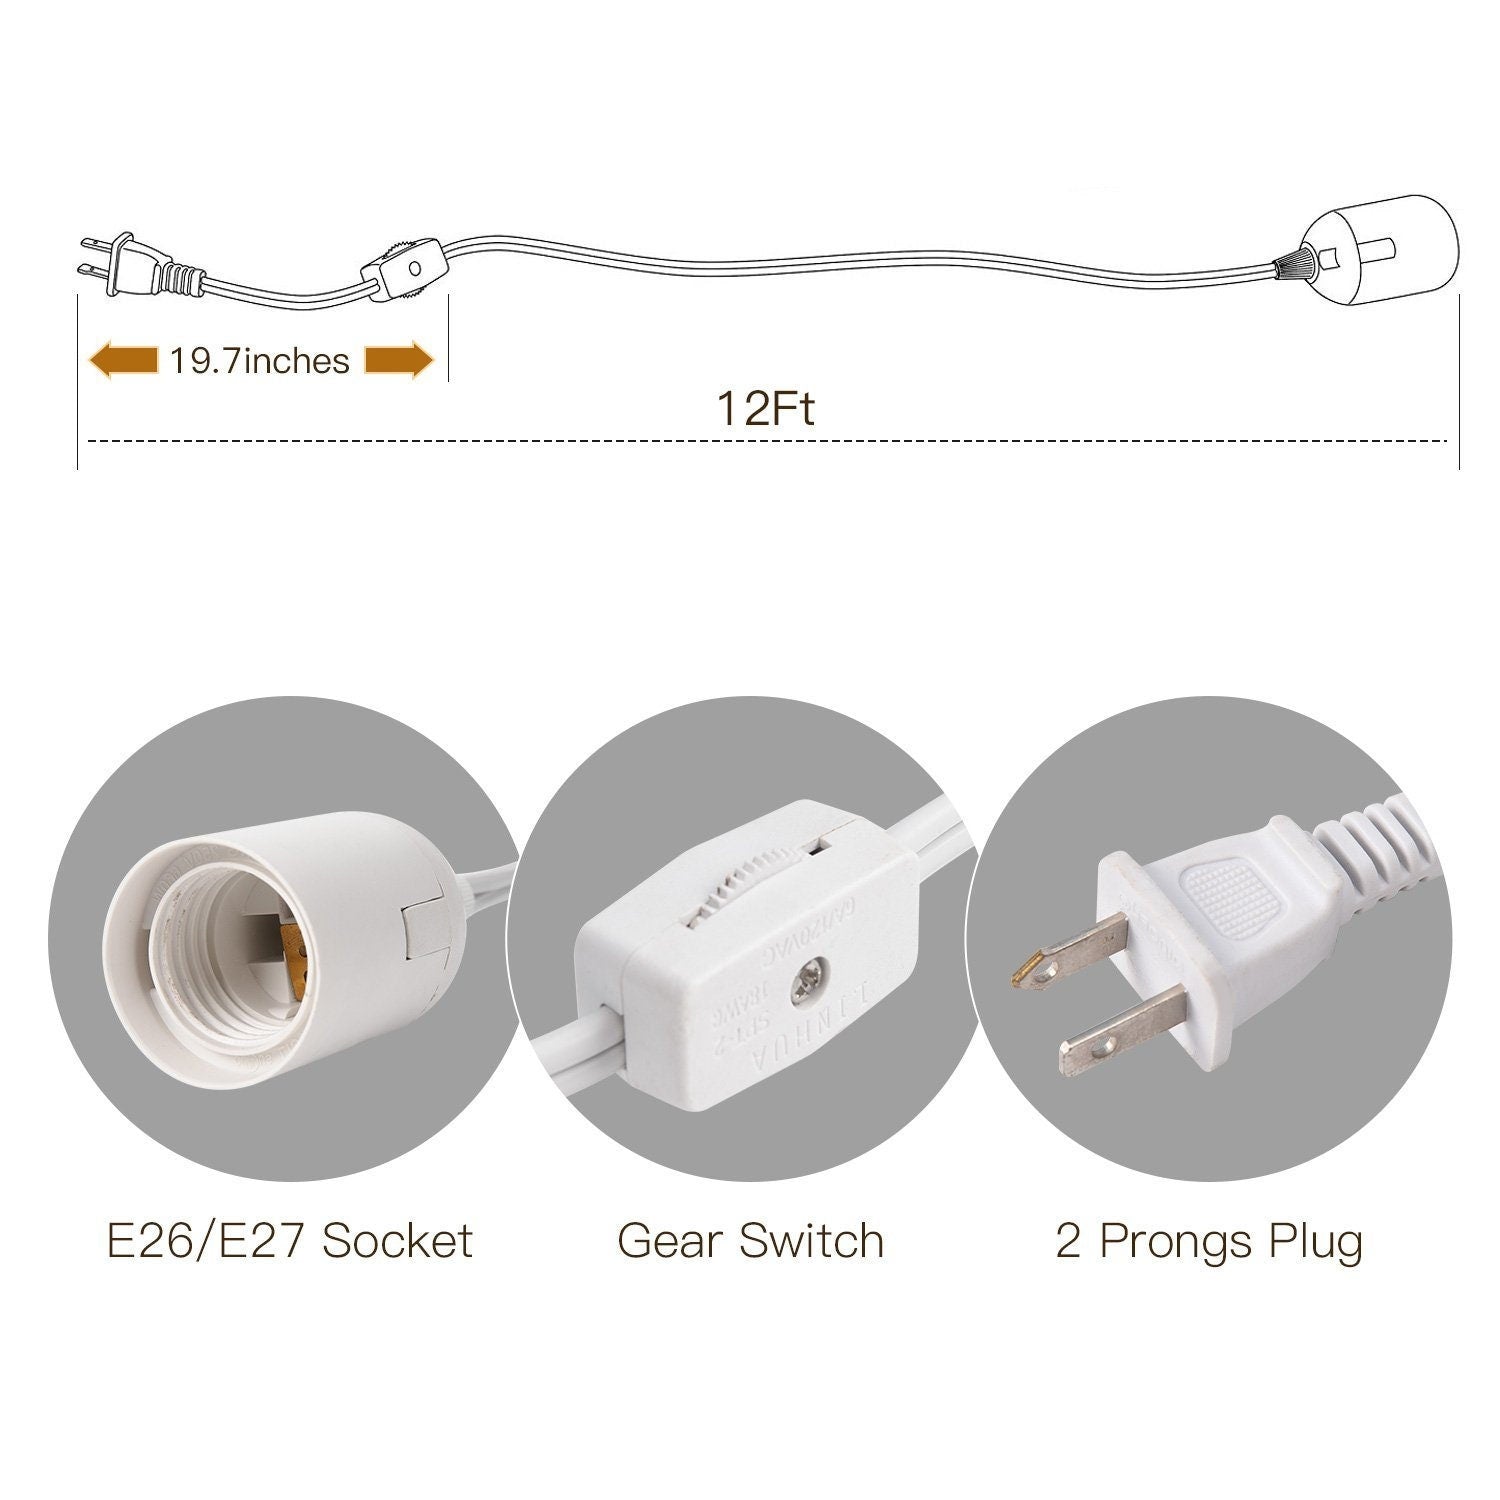 12ft E26/E27 Hanging Light Socket with Gear Switch Lantern Extension Cord  2-Prong US AC Power Plugs Pendant Lights Salt Lamps